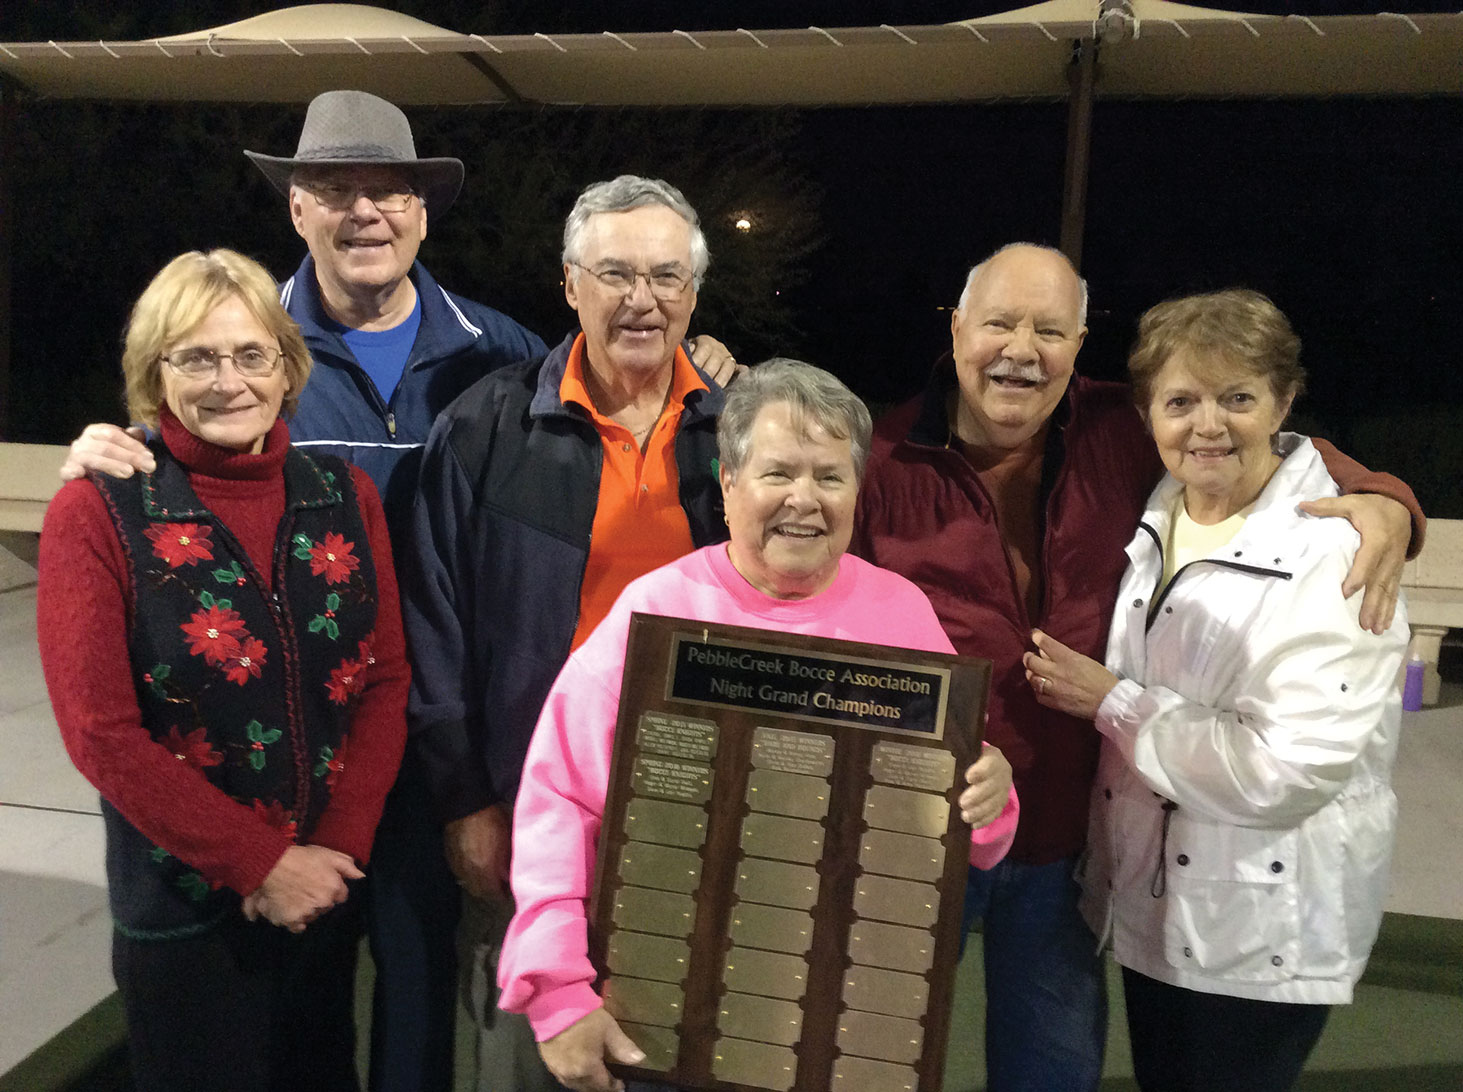 Members of the Bocce Knights, Grand Champions of the Fall Season Night Leagues are (left to right): Muriel Milewski, Roger Milewski, Dick Gwilt, Team Captain Carol Gwilt, Team Co-Captain Dave Ruedlin and Jan Ruedlin; not pictured are Alex Potapoff and Amy Potapoff.